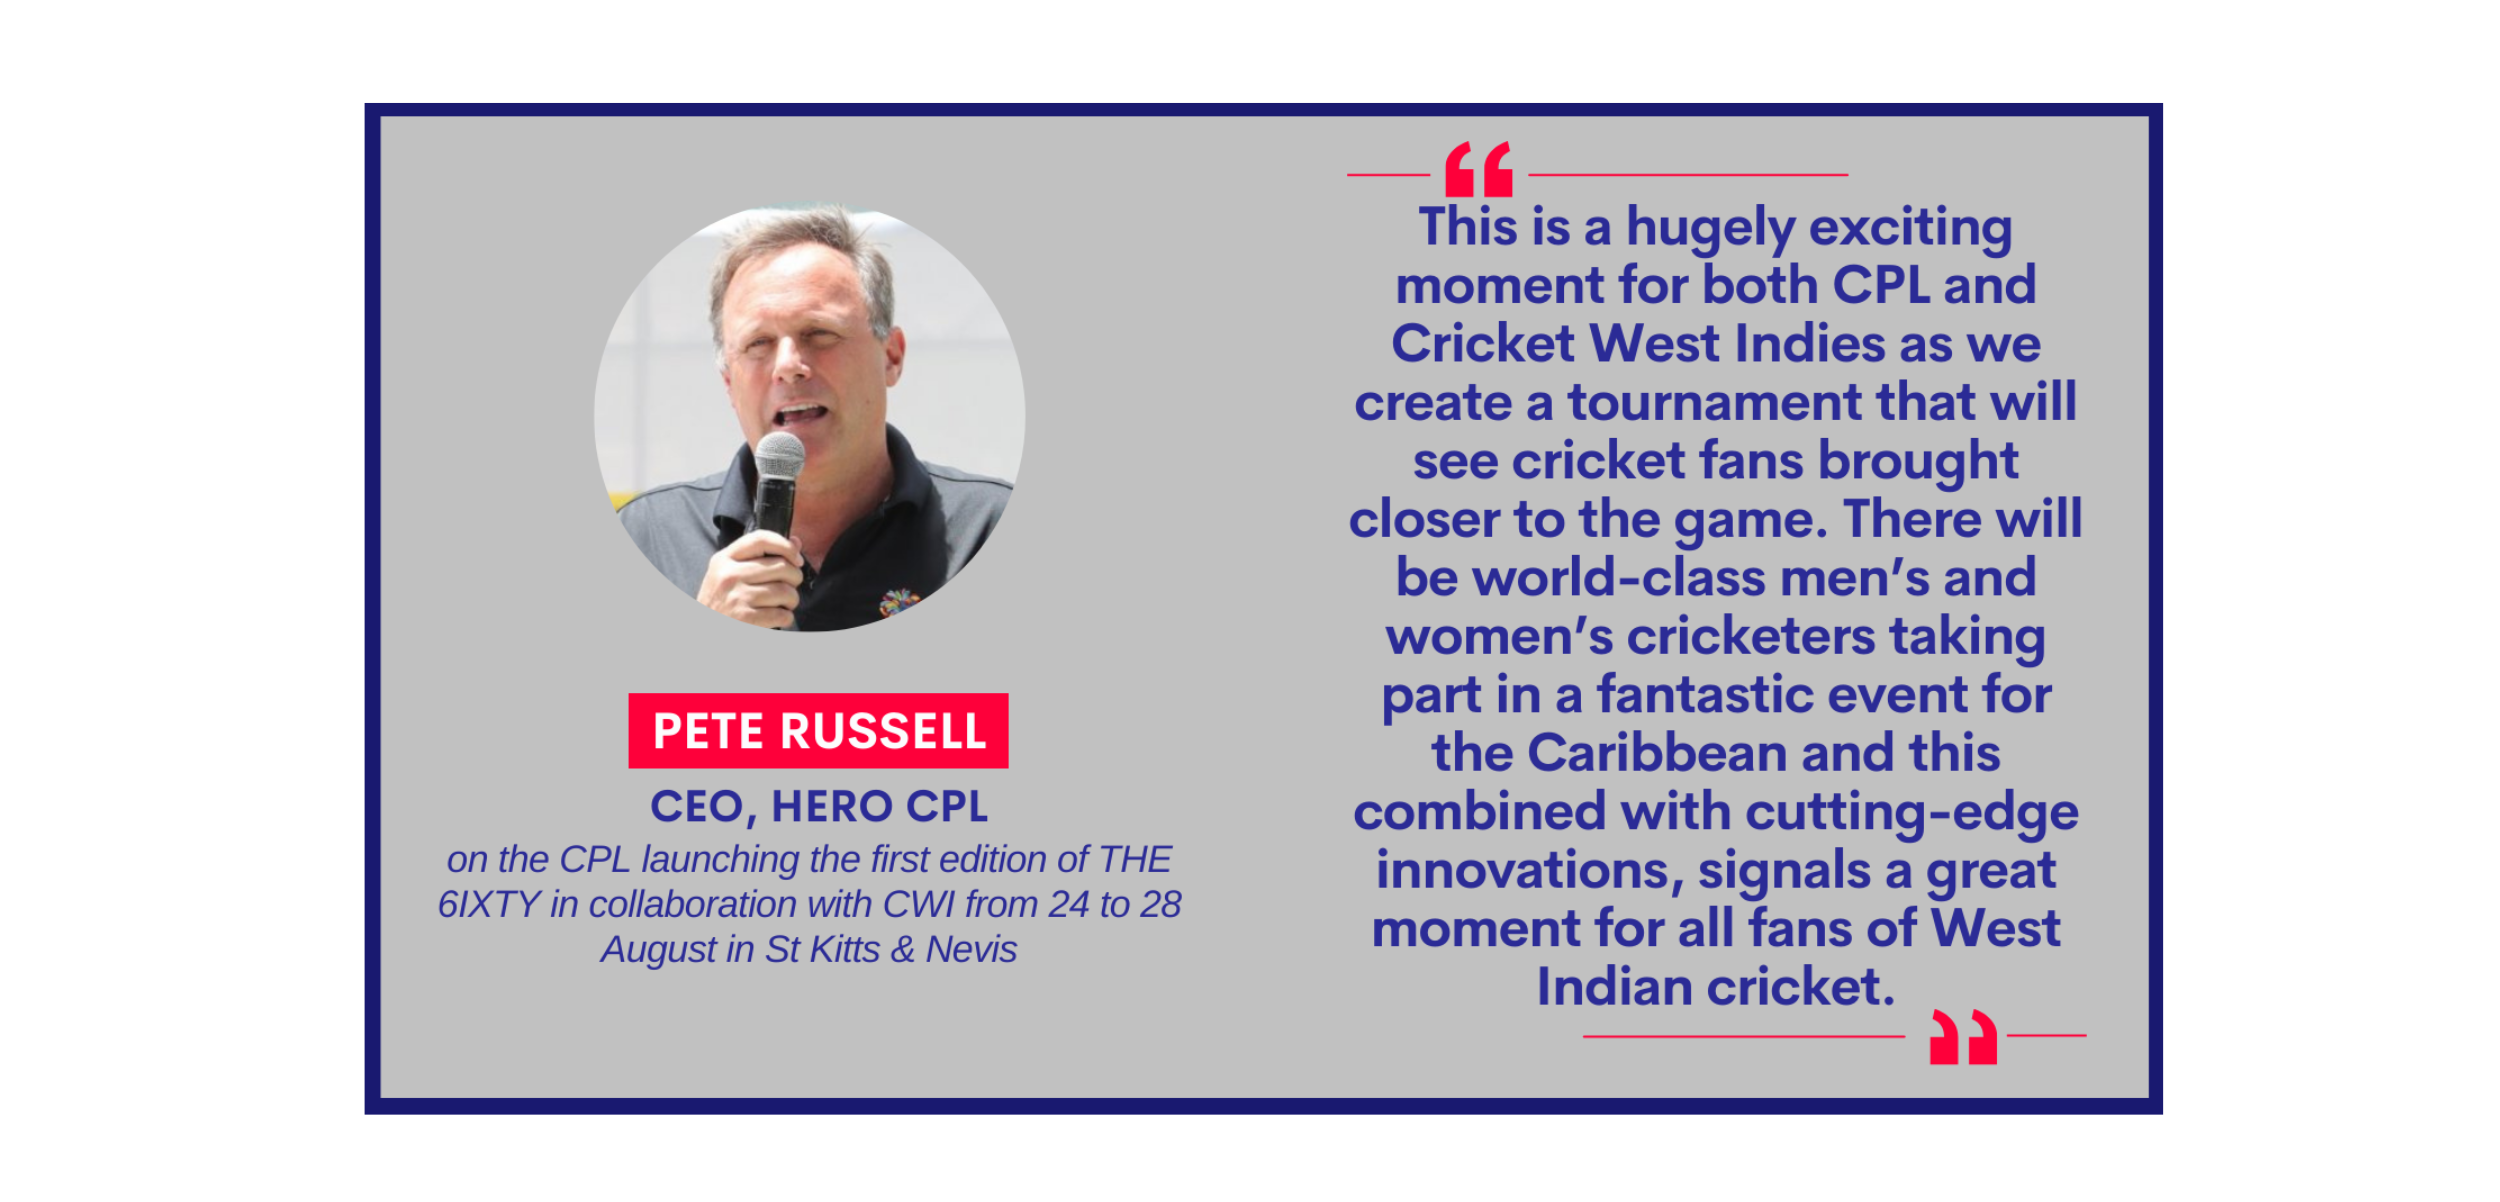 Pete Russell, CEO, Hero CPL on the CPL launching the first edition of THE 6IXTY in collaboration with CWI from 24 to 28 August in St Kitts & Nevis